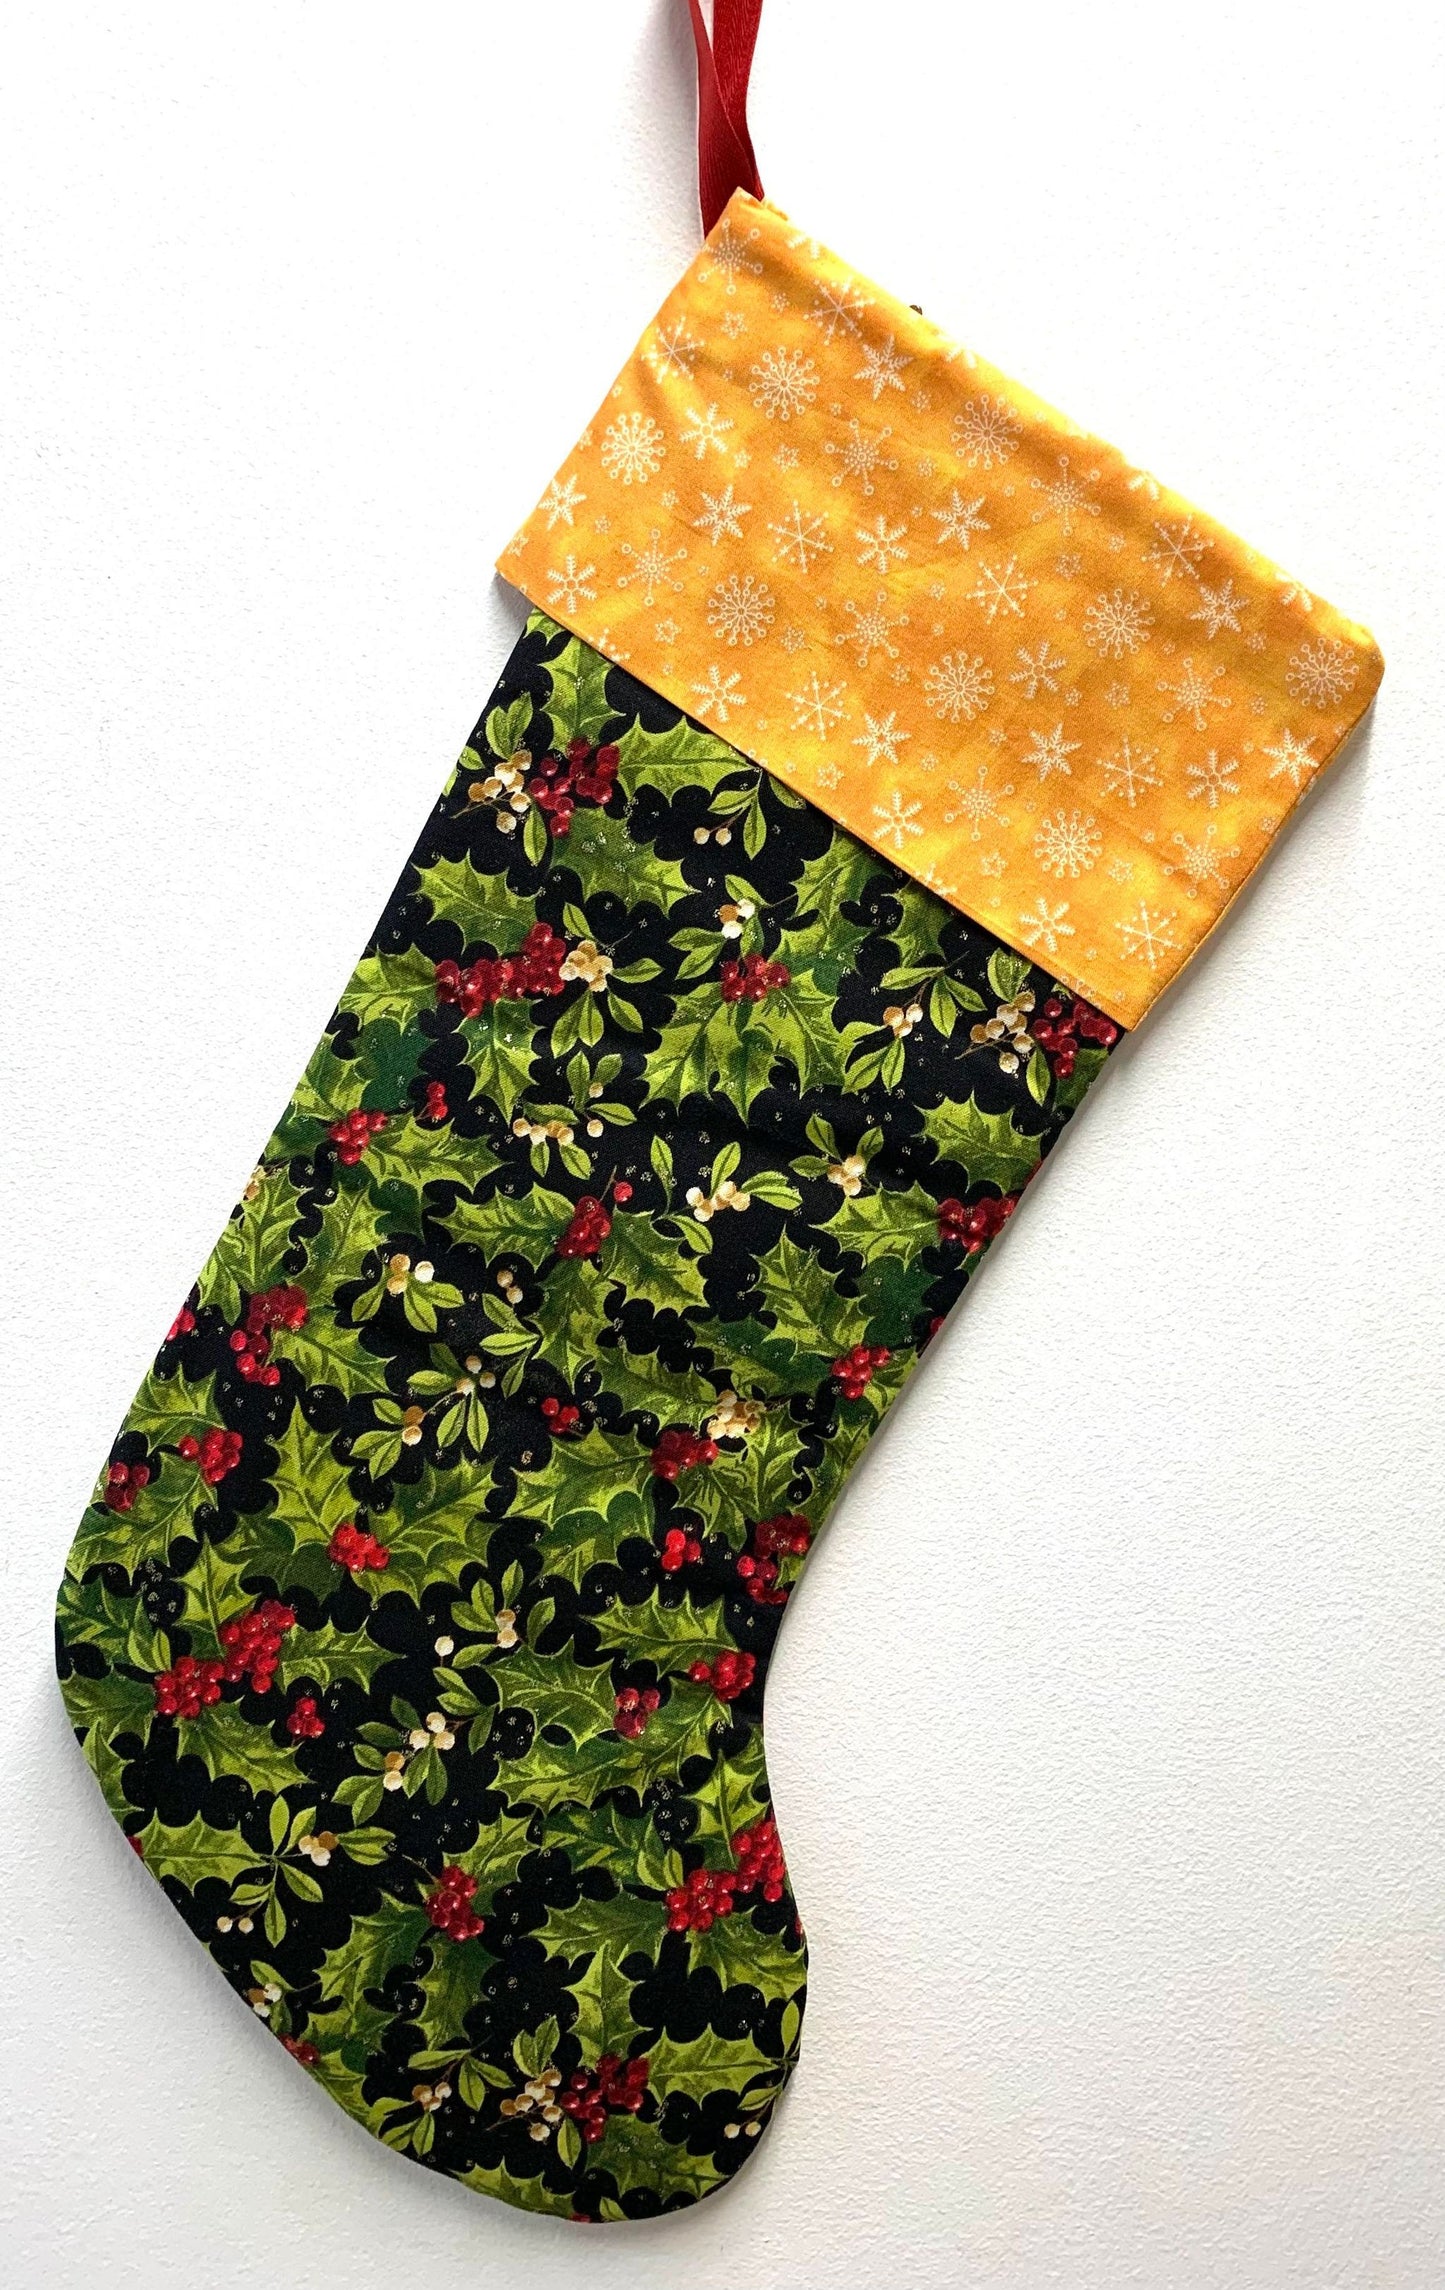 SEW HOT RIGHT NOW "Holly Leaves" CHRISTMAS STOCKING